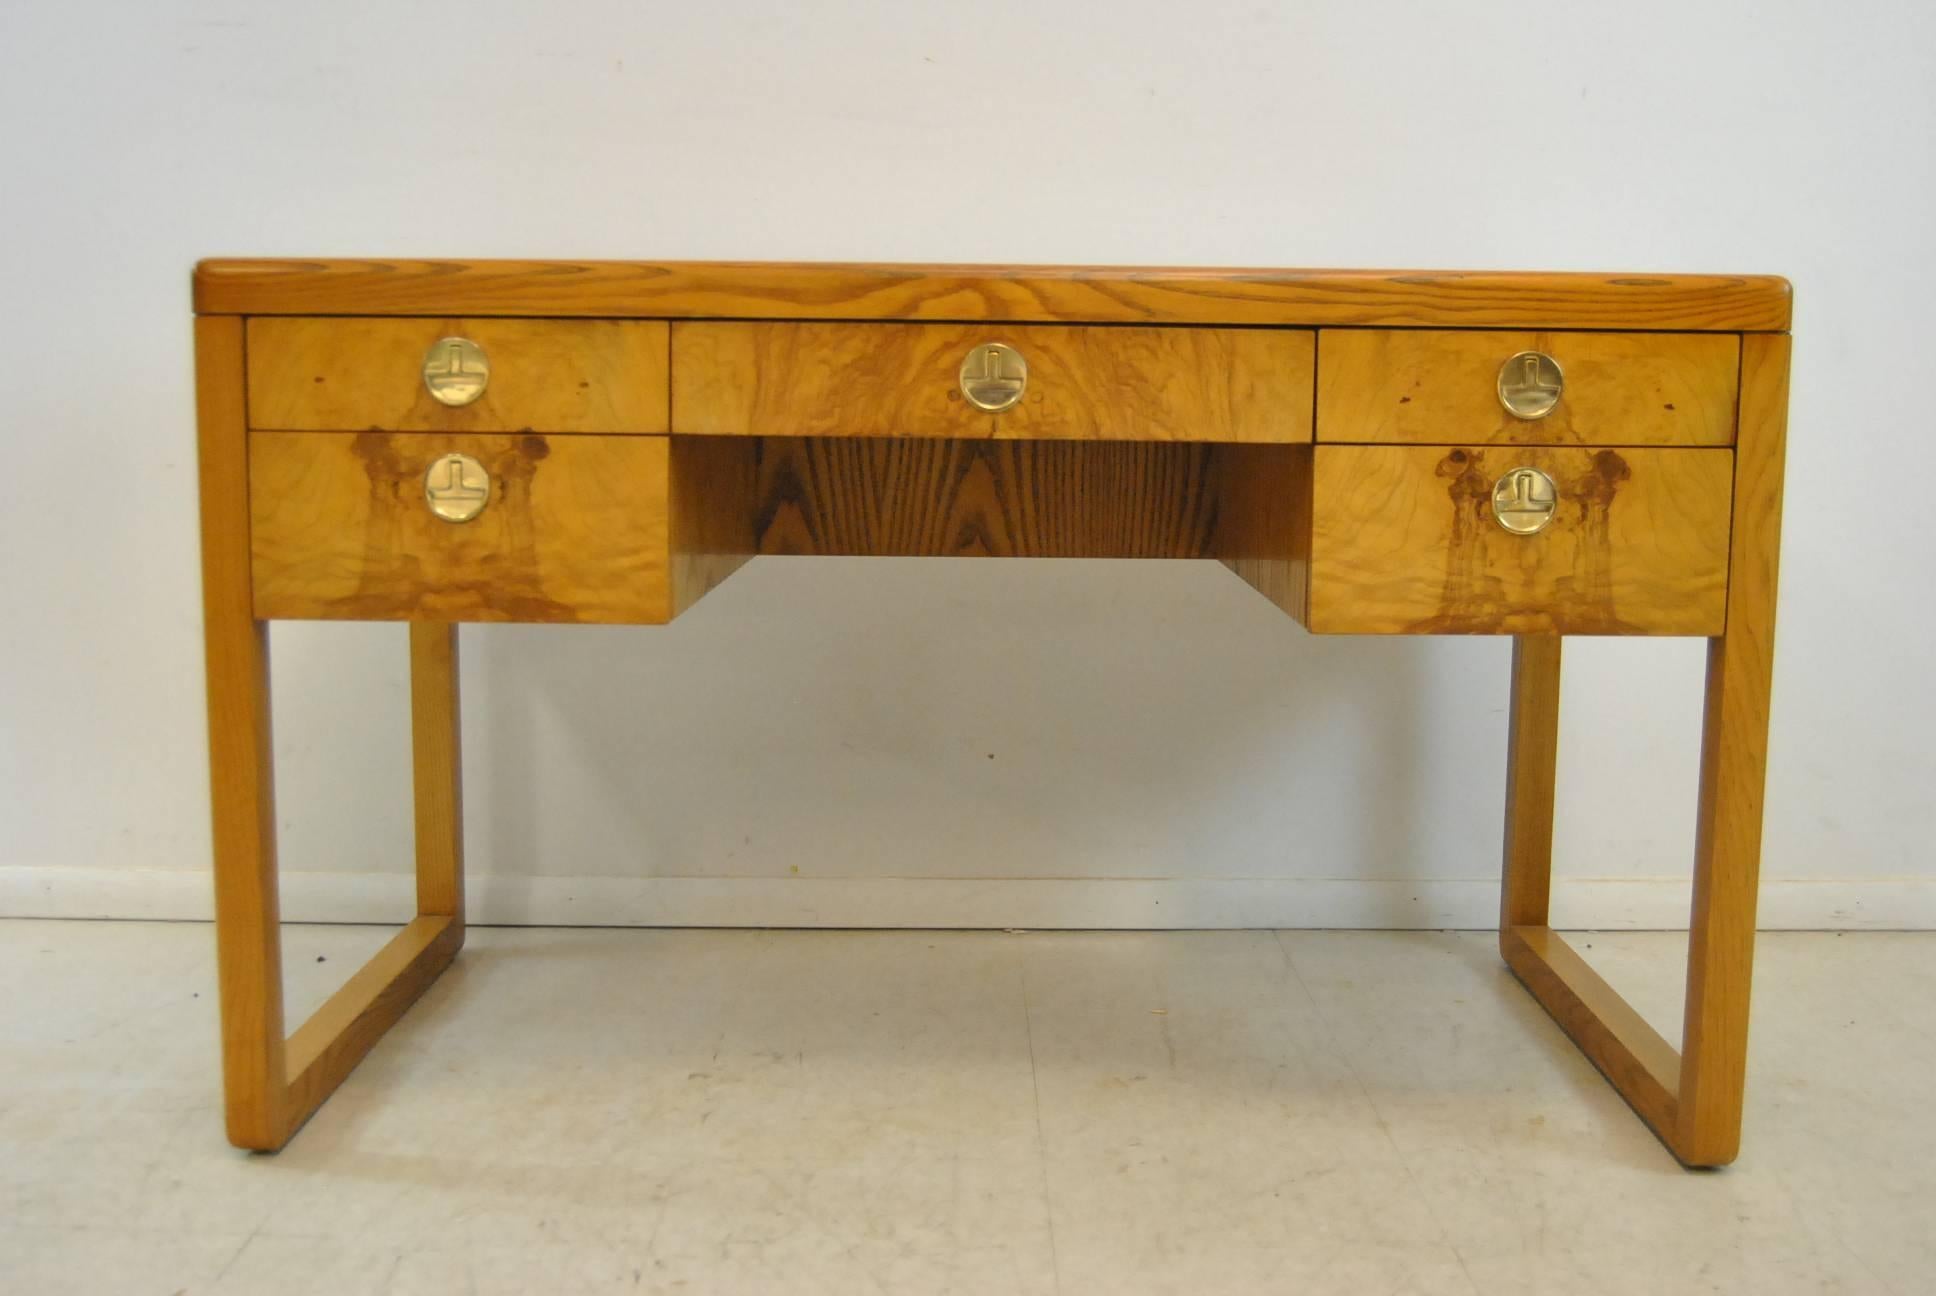 A fantastic Mid-Century Modern Desk by Sligh Furniture. From the 1960s, this burl desk features a dovetailed construction and the original brass hardware. The dimensions are 50